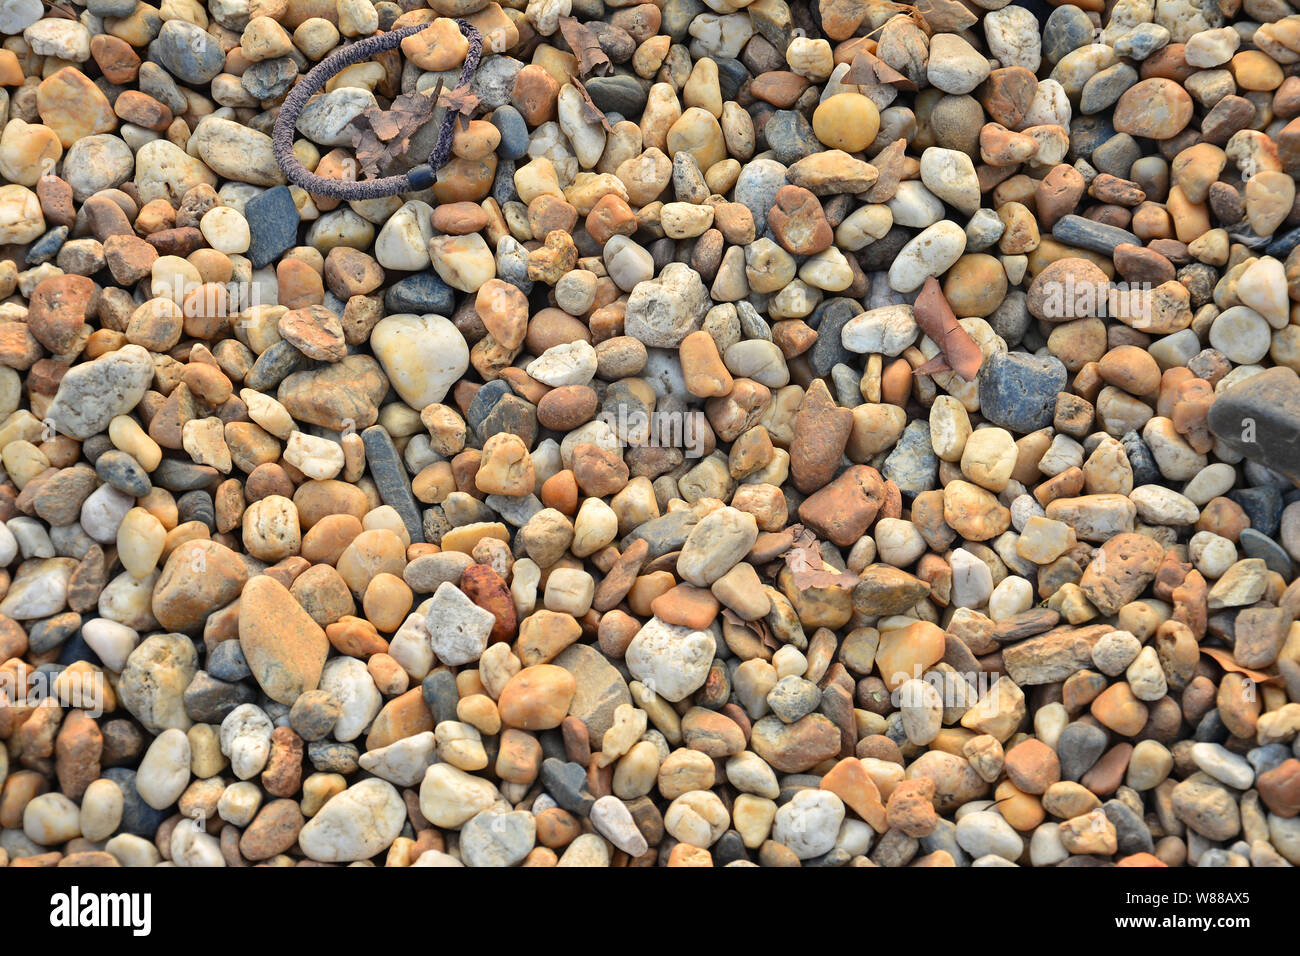 Colorful small pebbles or stone in garden Stock Photo